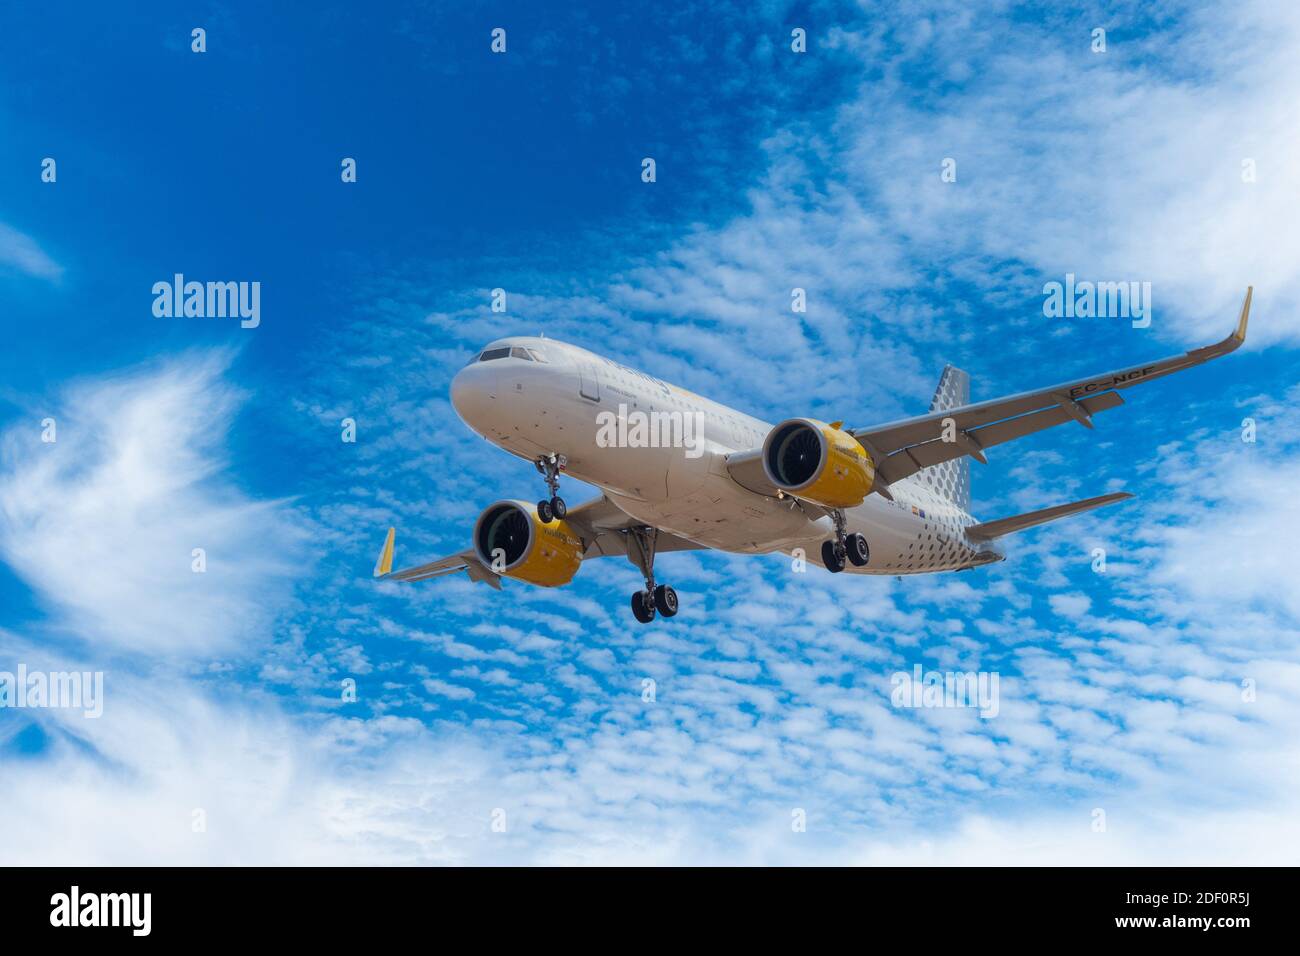 Vueling Airbus A320 with wheels down approaching airport runway on landing at Gran Canaria airport Stock Photo